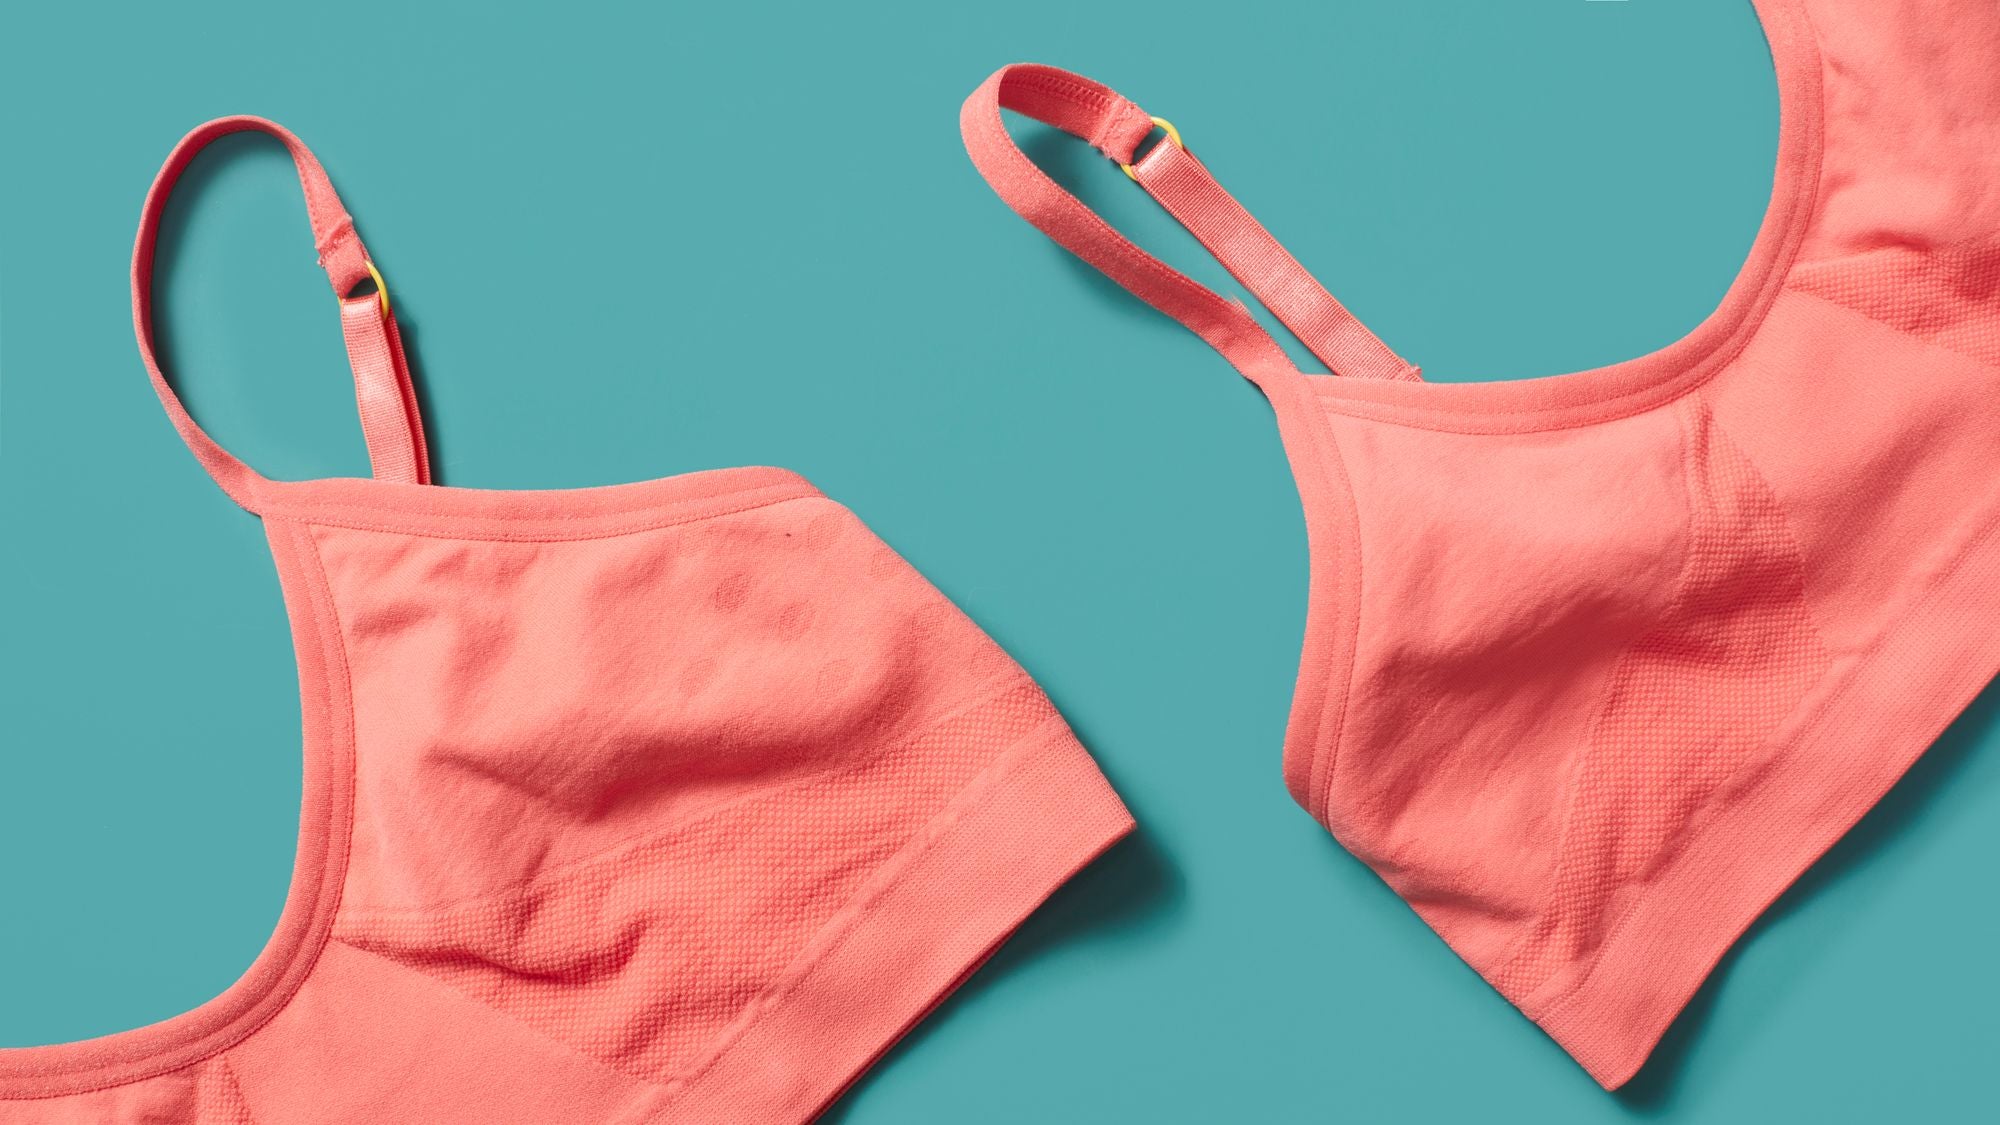 What Are the Benefits of Wearing a Wireless Bra? Discover the Advantages